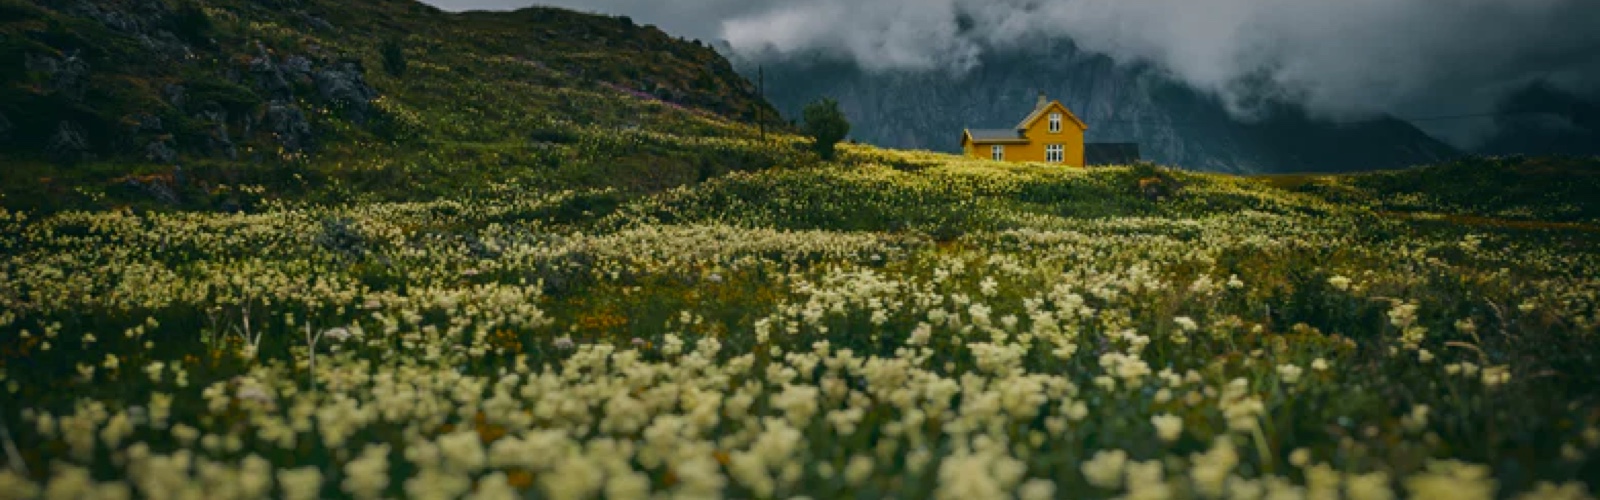 field of flowers with a yellow house in the distance